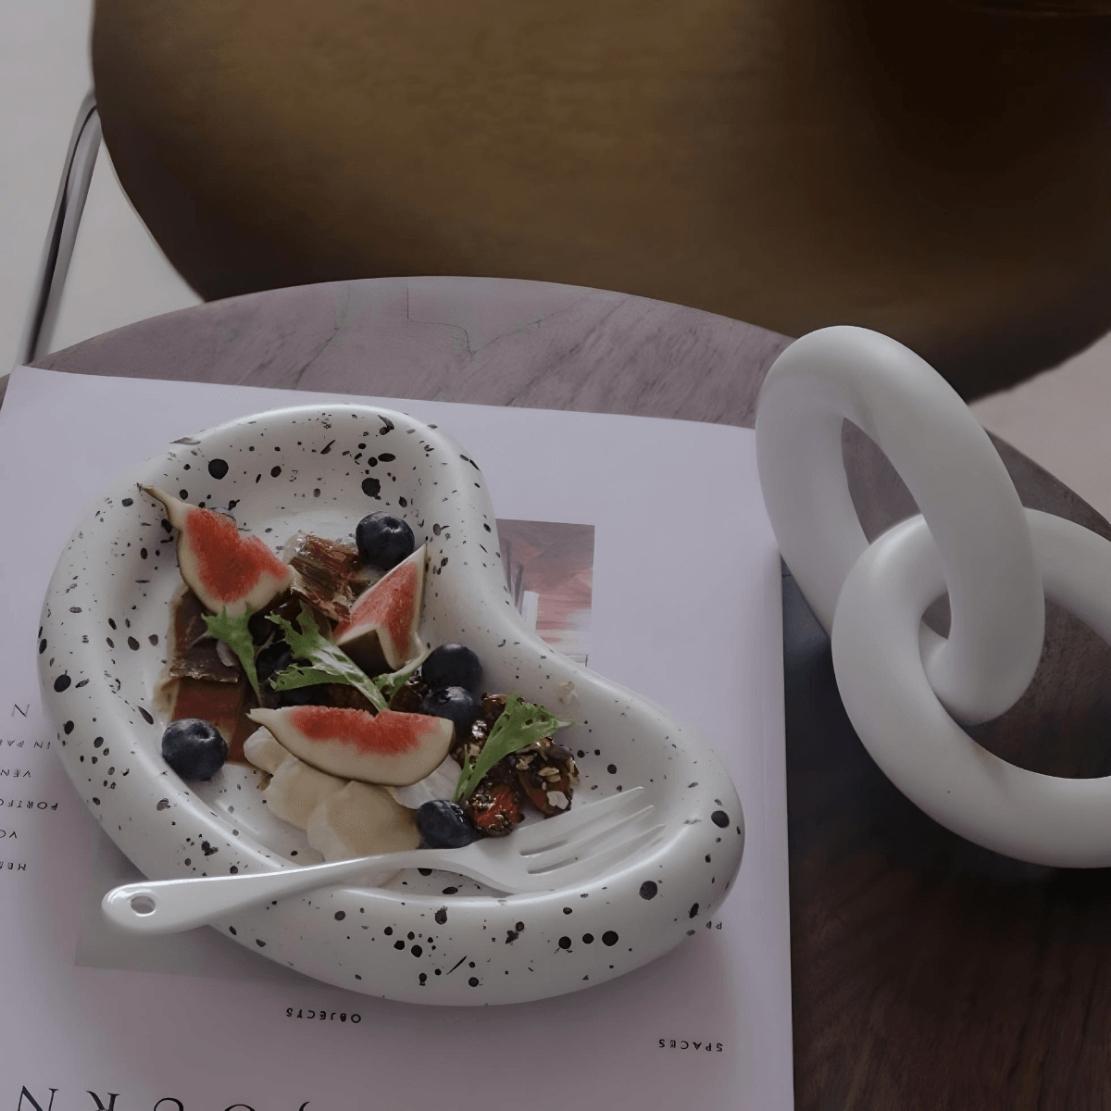 Bean shaped ceramic splash ink plate with salad on dining table